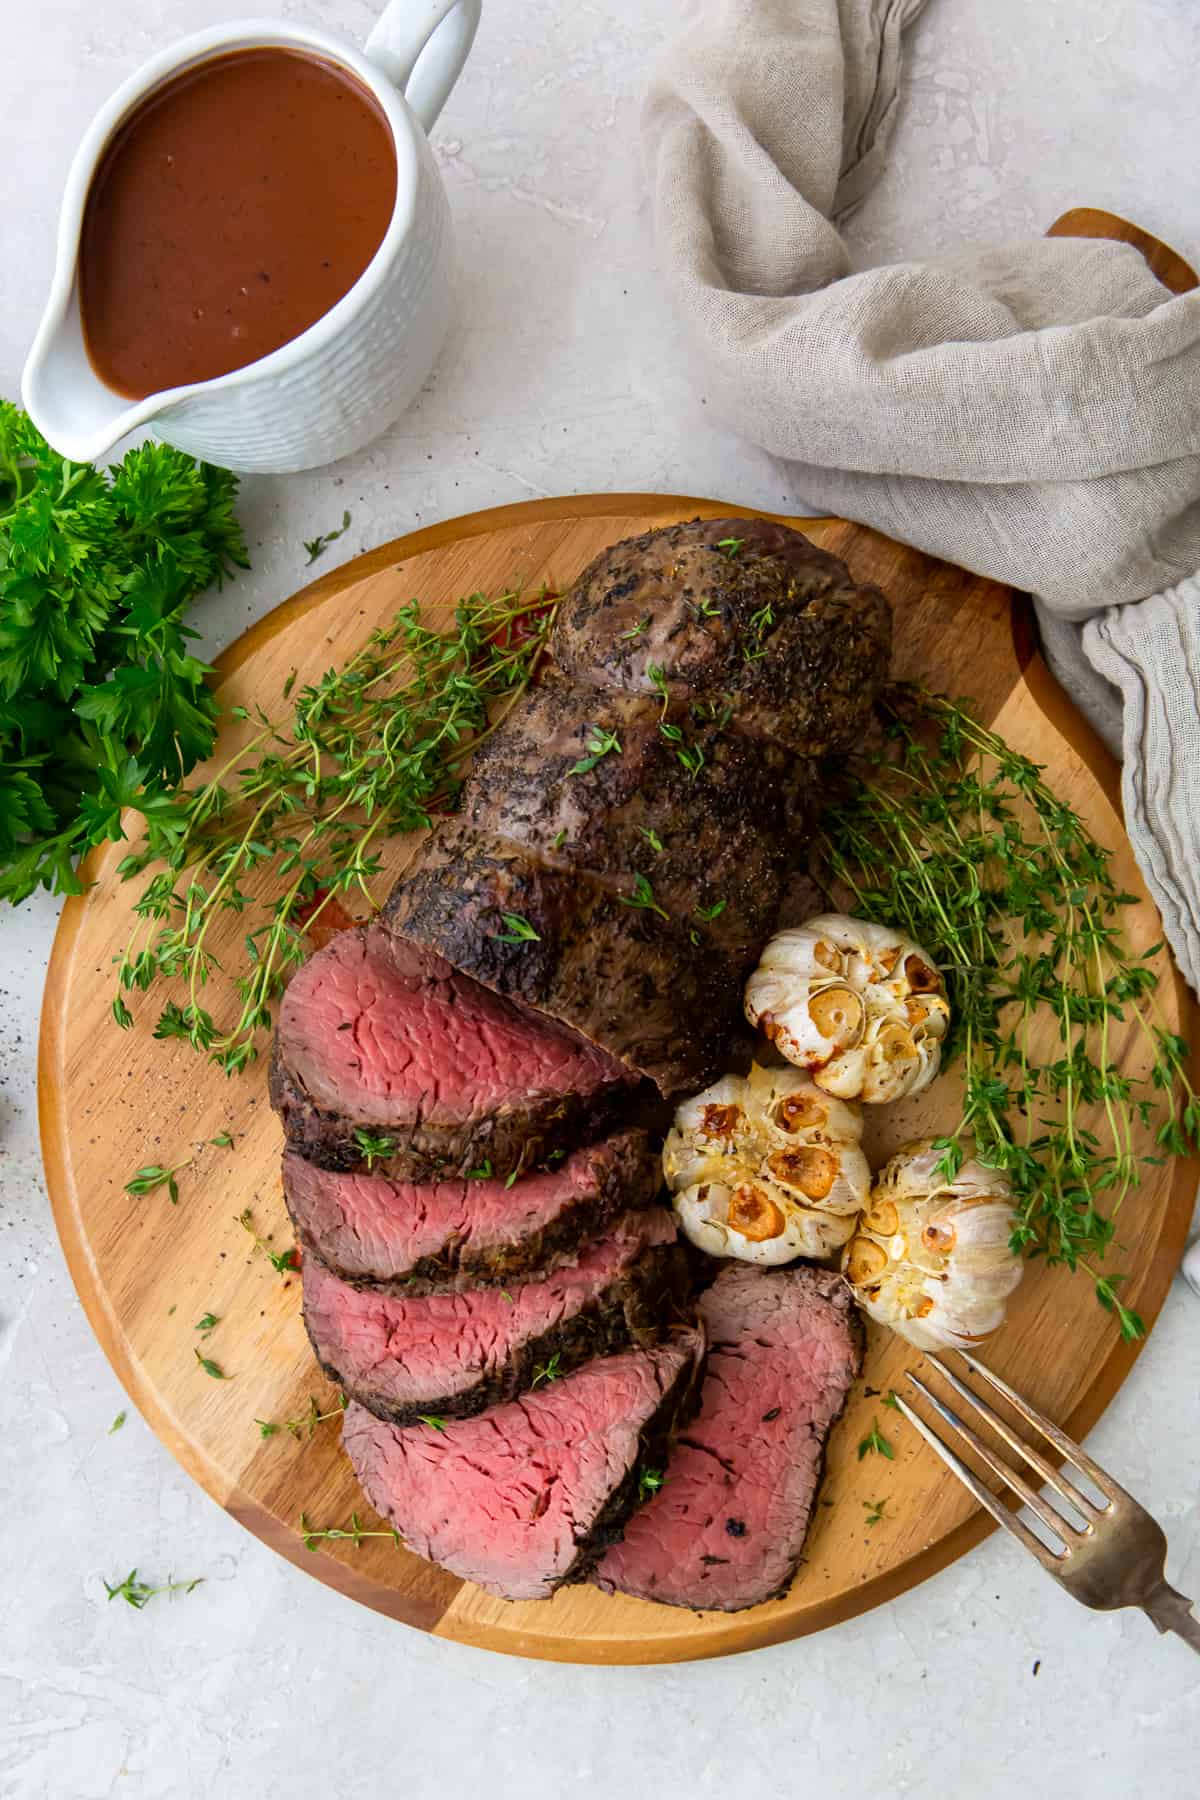 Beef Tenderloin from From Valerie's Kitchen; Collection of 60 Amazing Recipes for Your Holiday Dinners compiled by Jane Bonacci, The Heritage Cook.